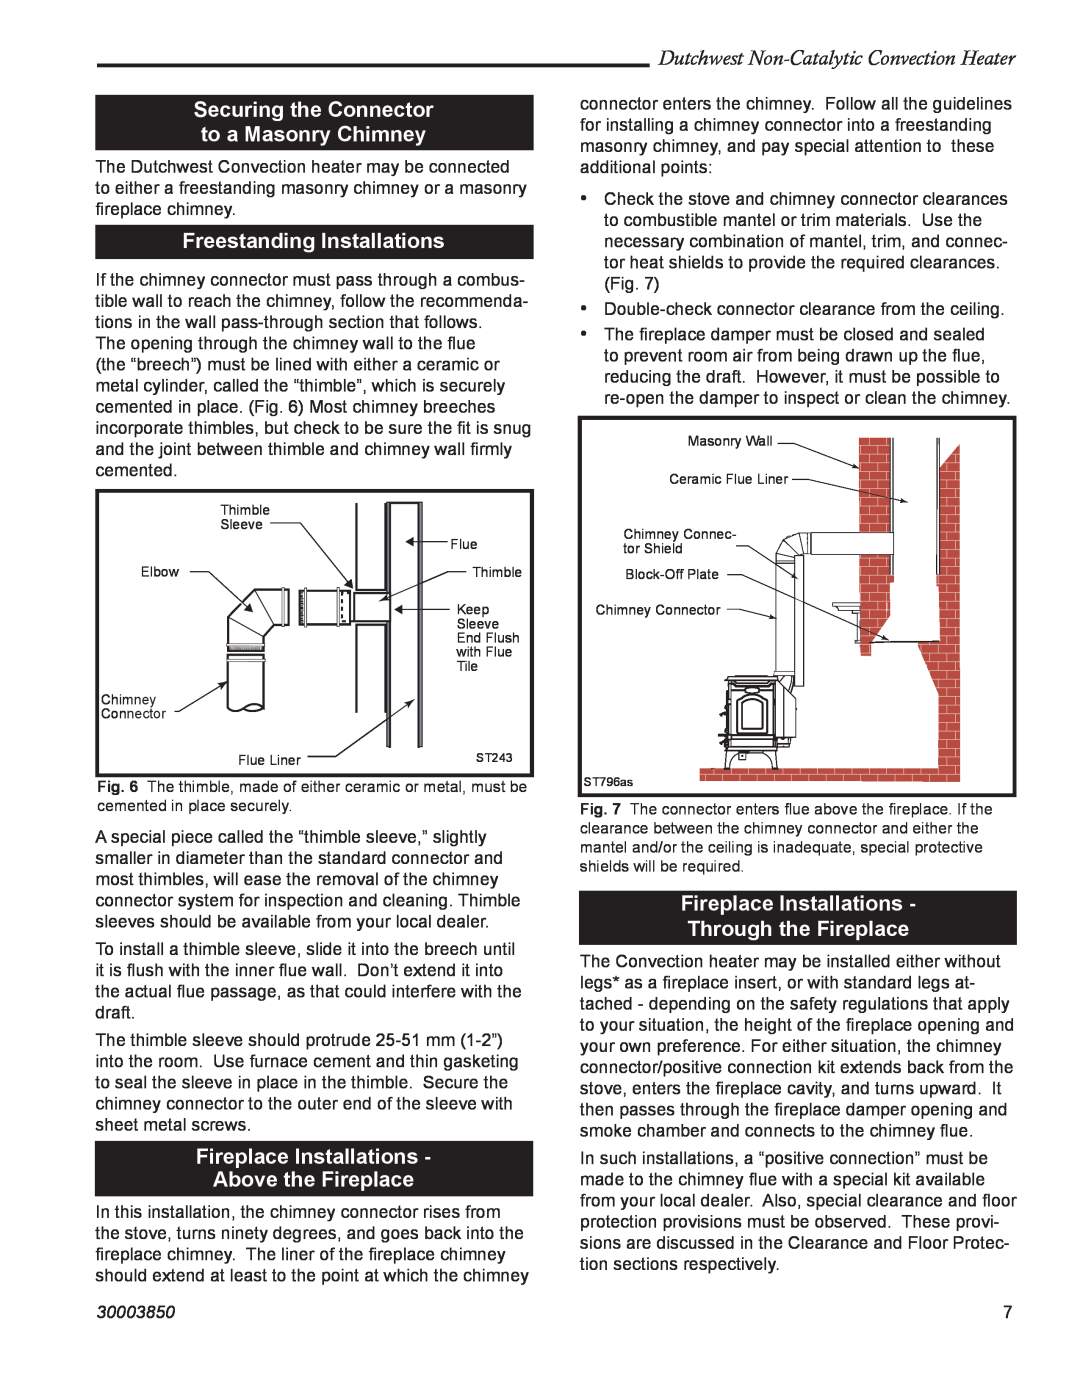 Vermont Casting 2478CE manual Securing the Connector to a Masonry Chimney, Freestanding Installations, 30003850 